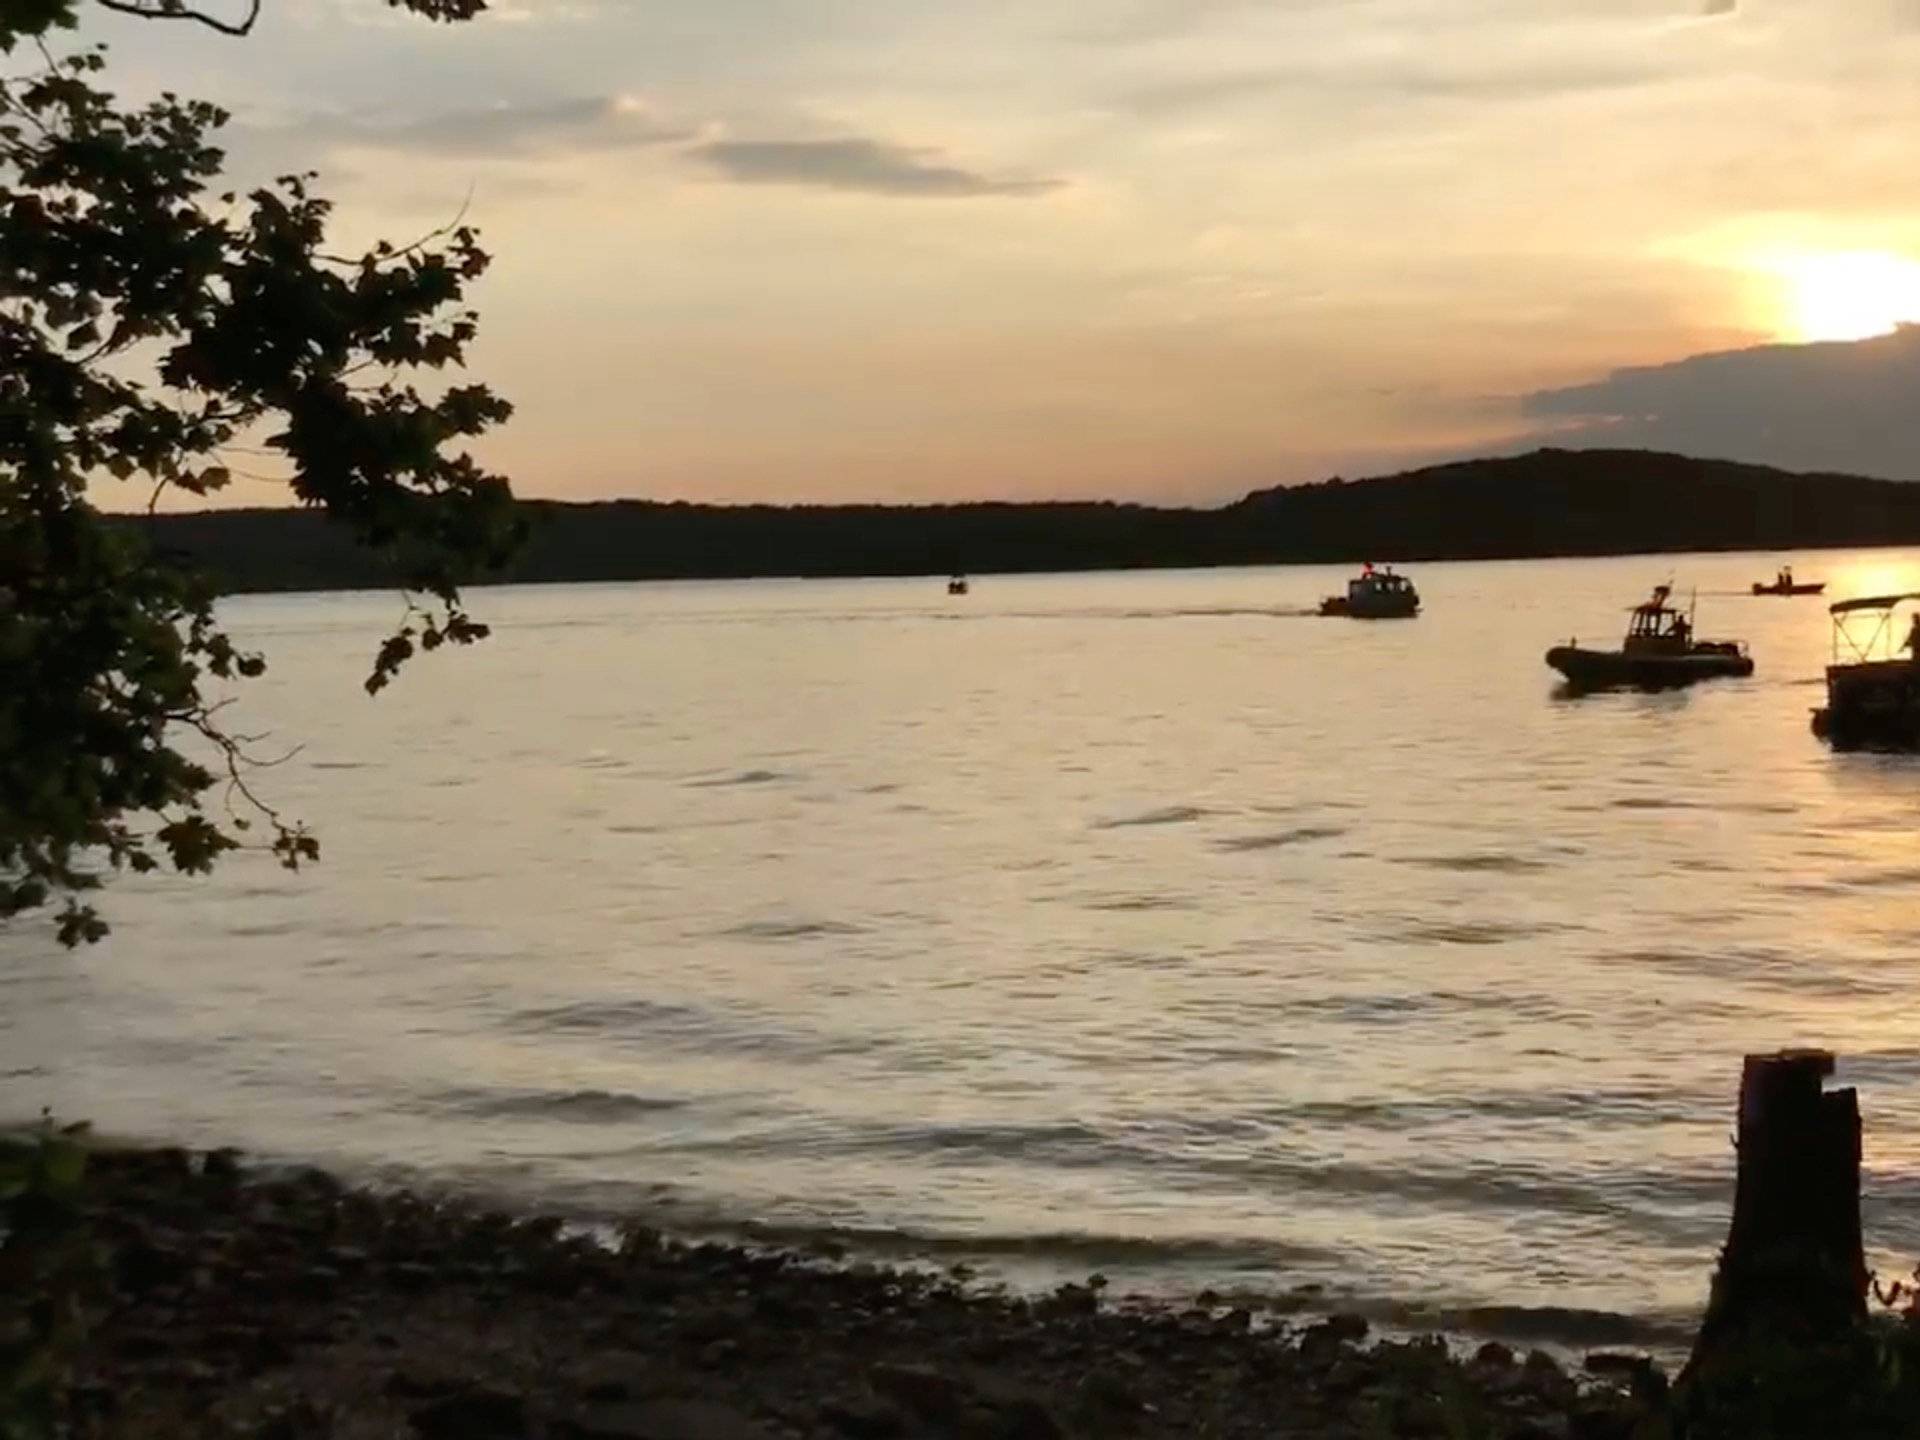 Rescue personnel work after an amphibious "duck boat" capsized and sank, at Table Rock Lake near Branson, Stone County